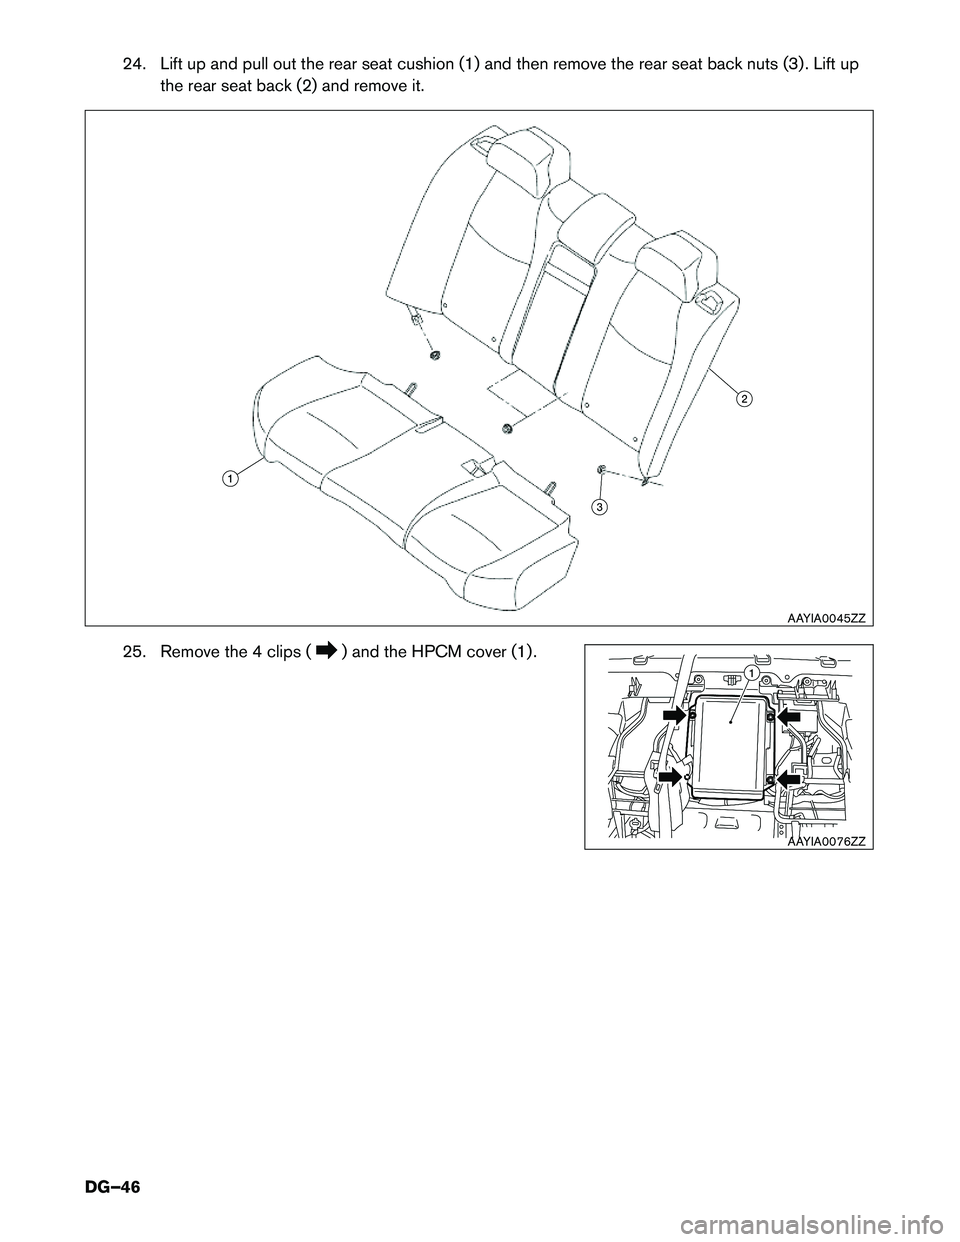 INFINITI Q70 HYBRID 2016  Dismantling Guide 24. Lift up and pull out the rear seat cushion (1) and then remove the rear seat back nuts (3) . Lift upthe rear seat back (2) and remove it.
25. Remove the 4 clips (
) and the HPCM cover (1) .
AAYIA0